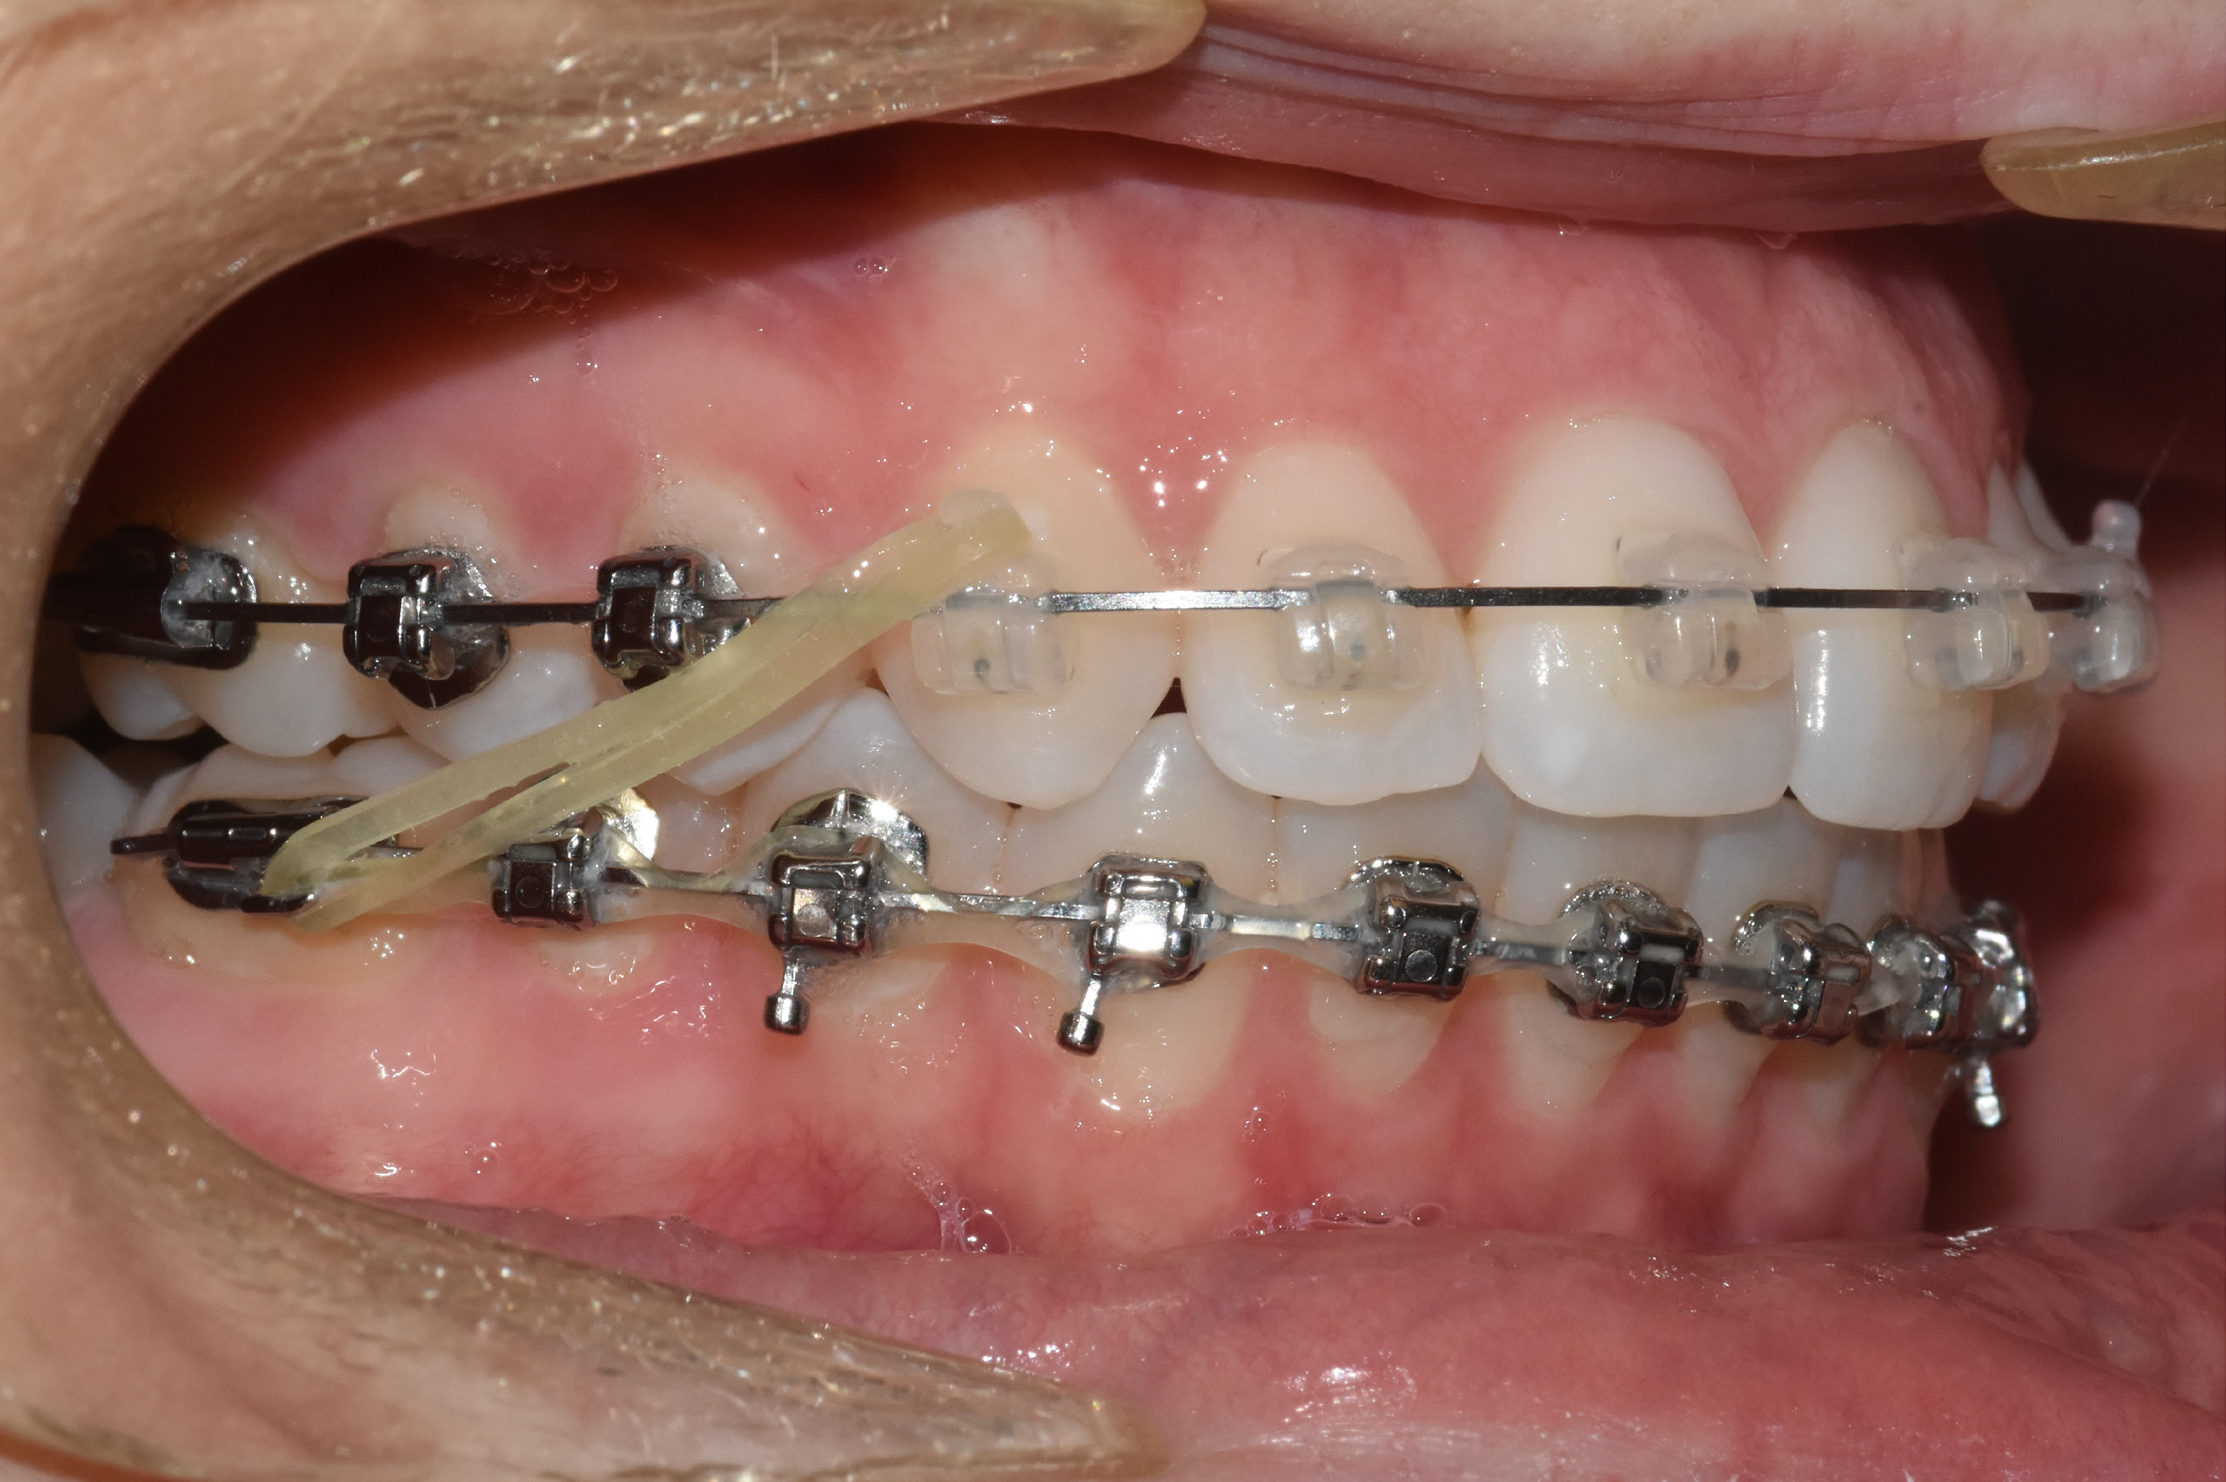 How Do Rubber Bands Work For Orthodontic Braces? - Hillsdale Orthodontics